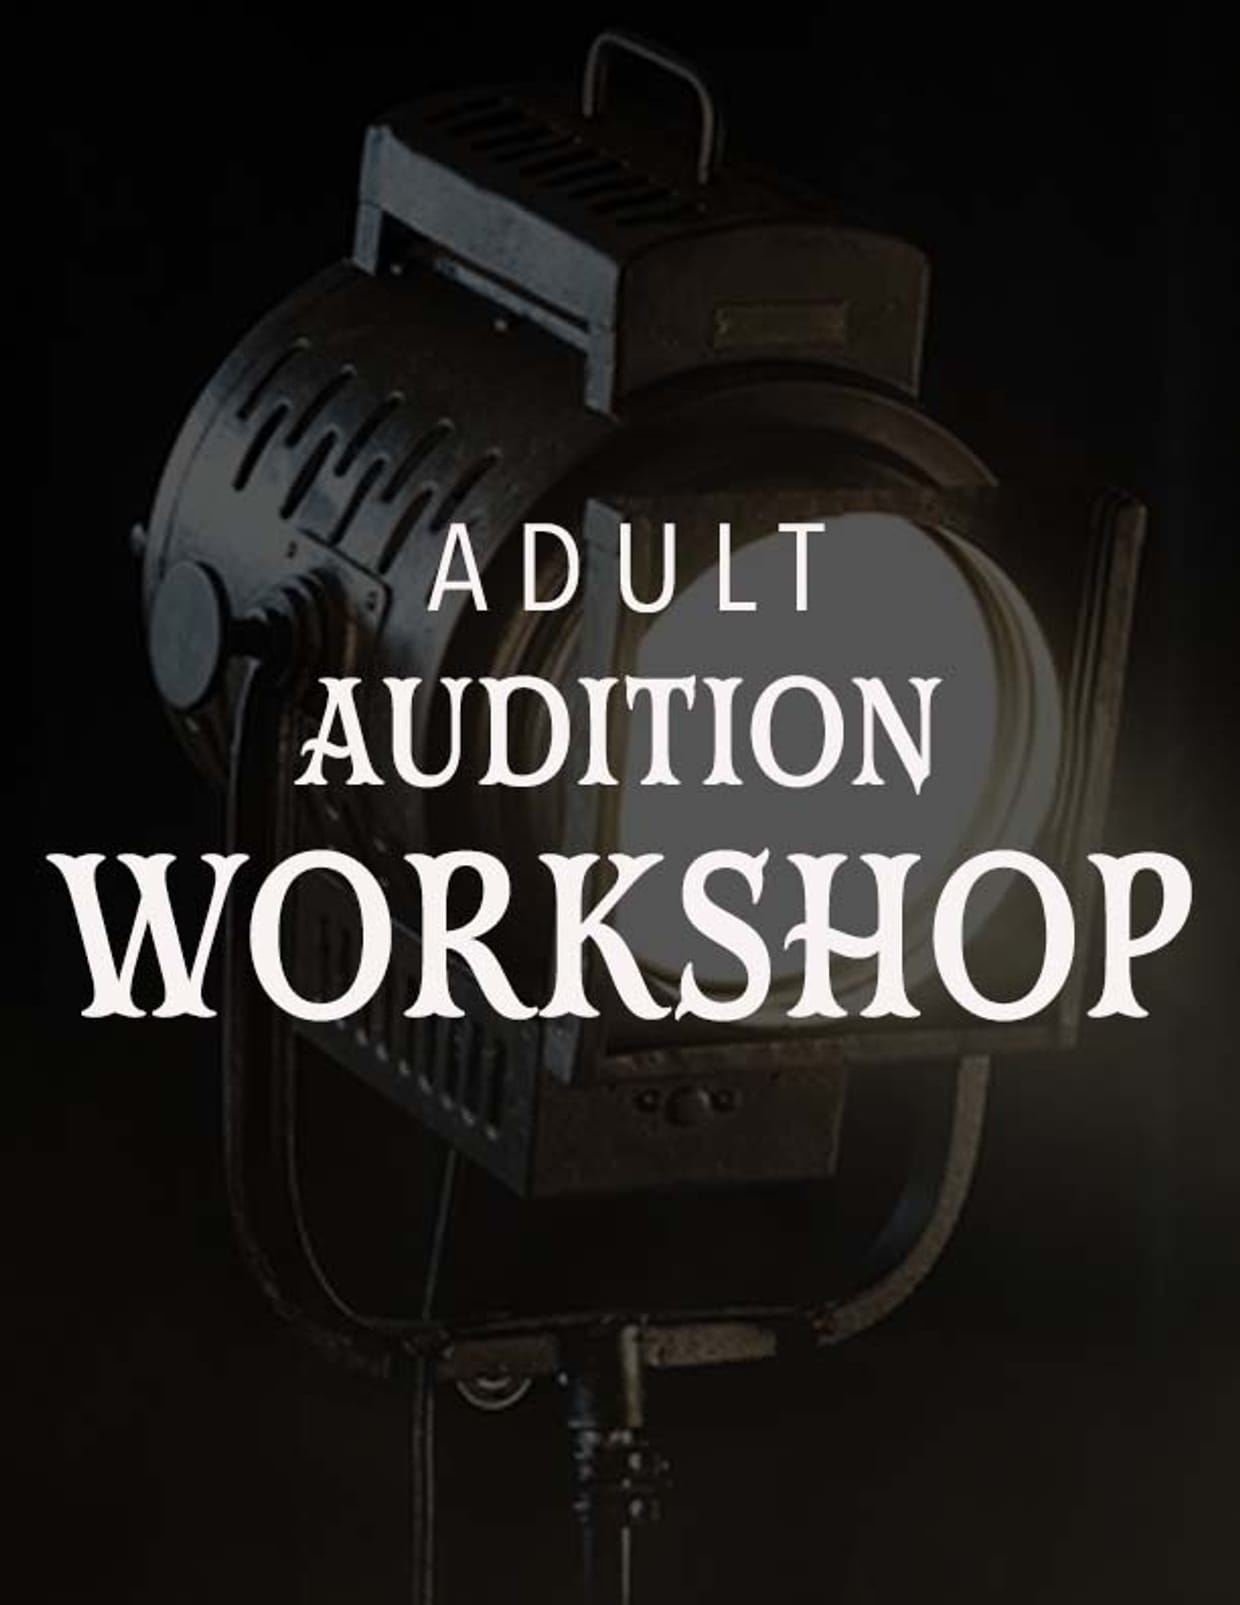 Audition Workshop for Adults